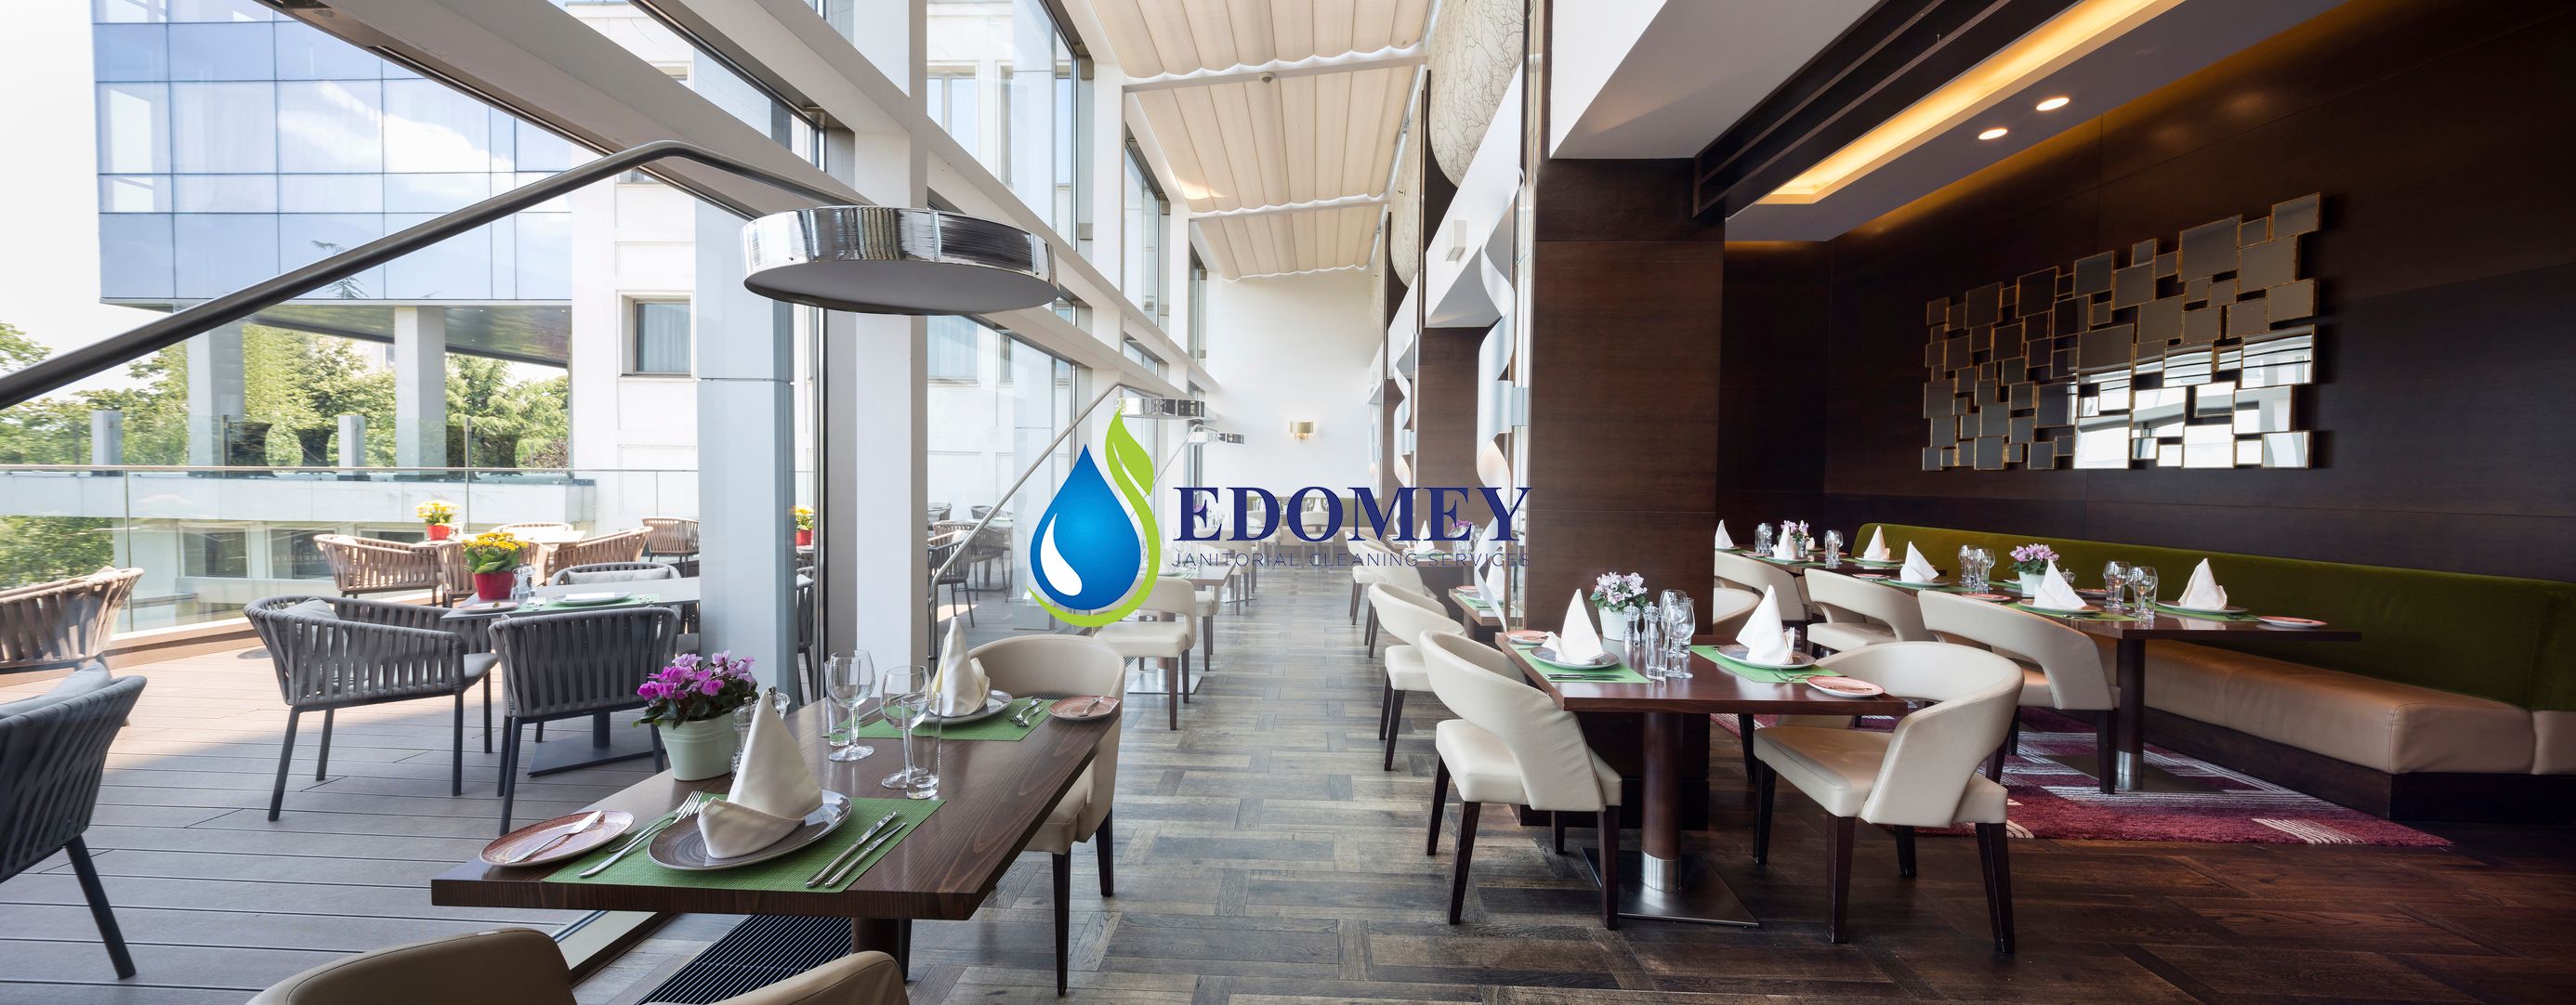 restaurant cleaning services vancouver